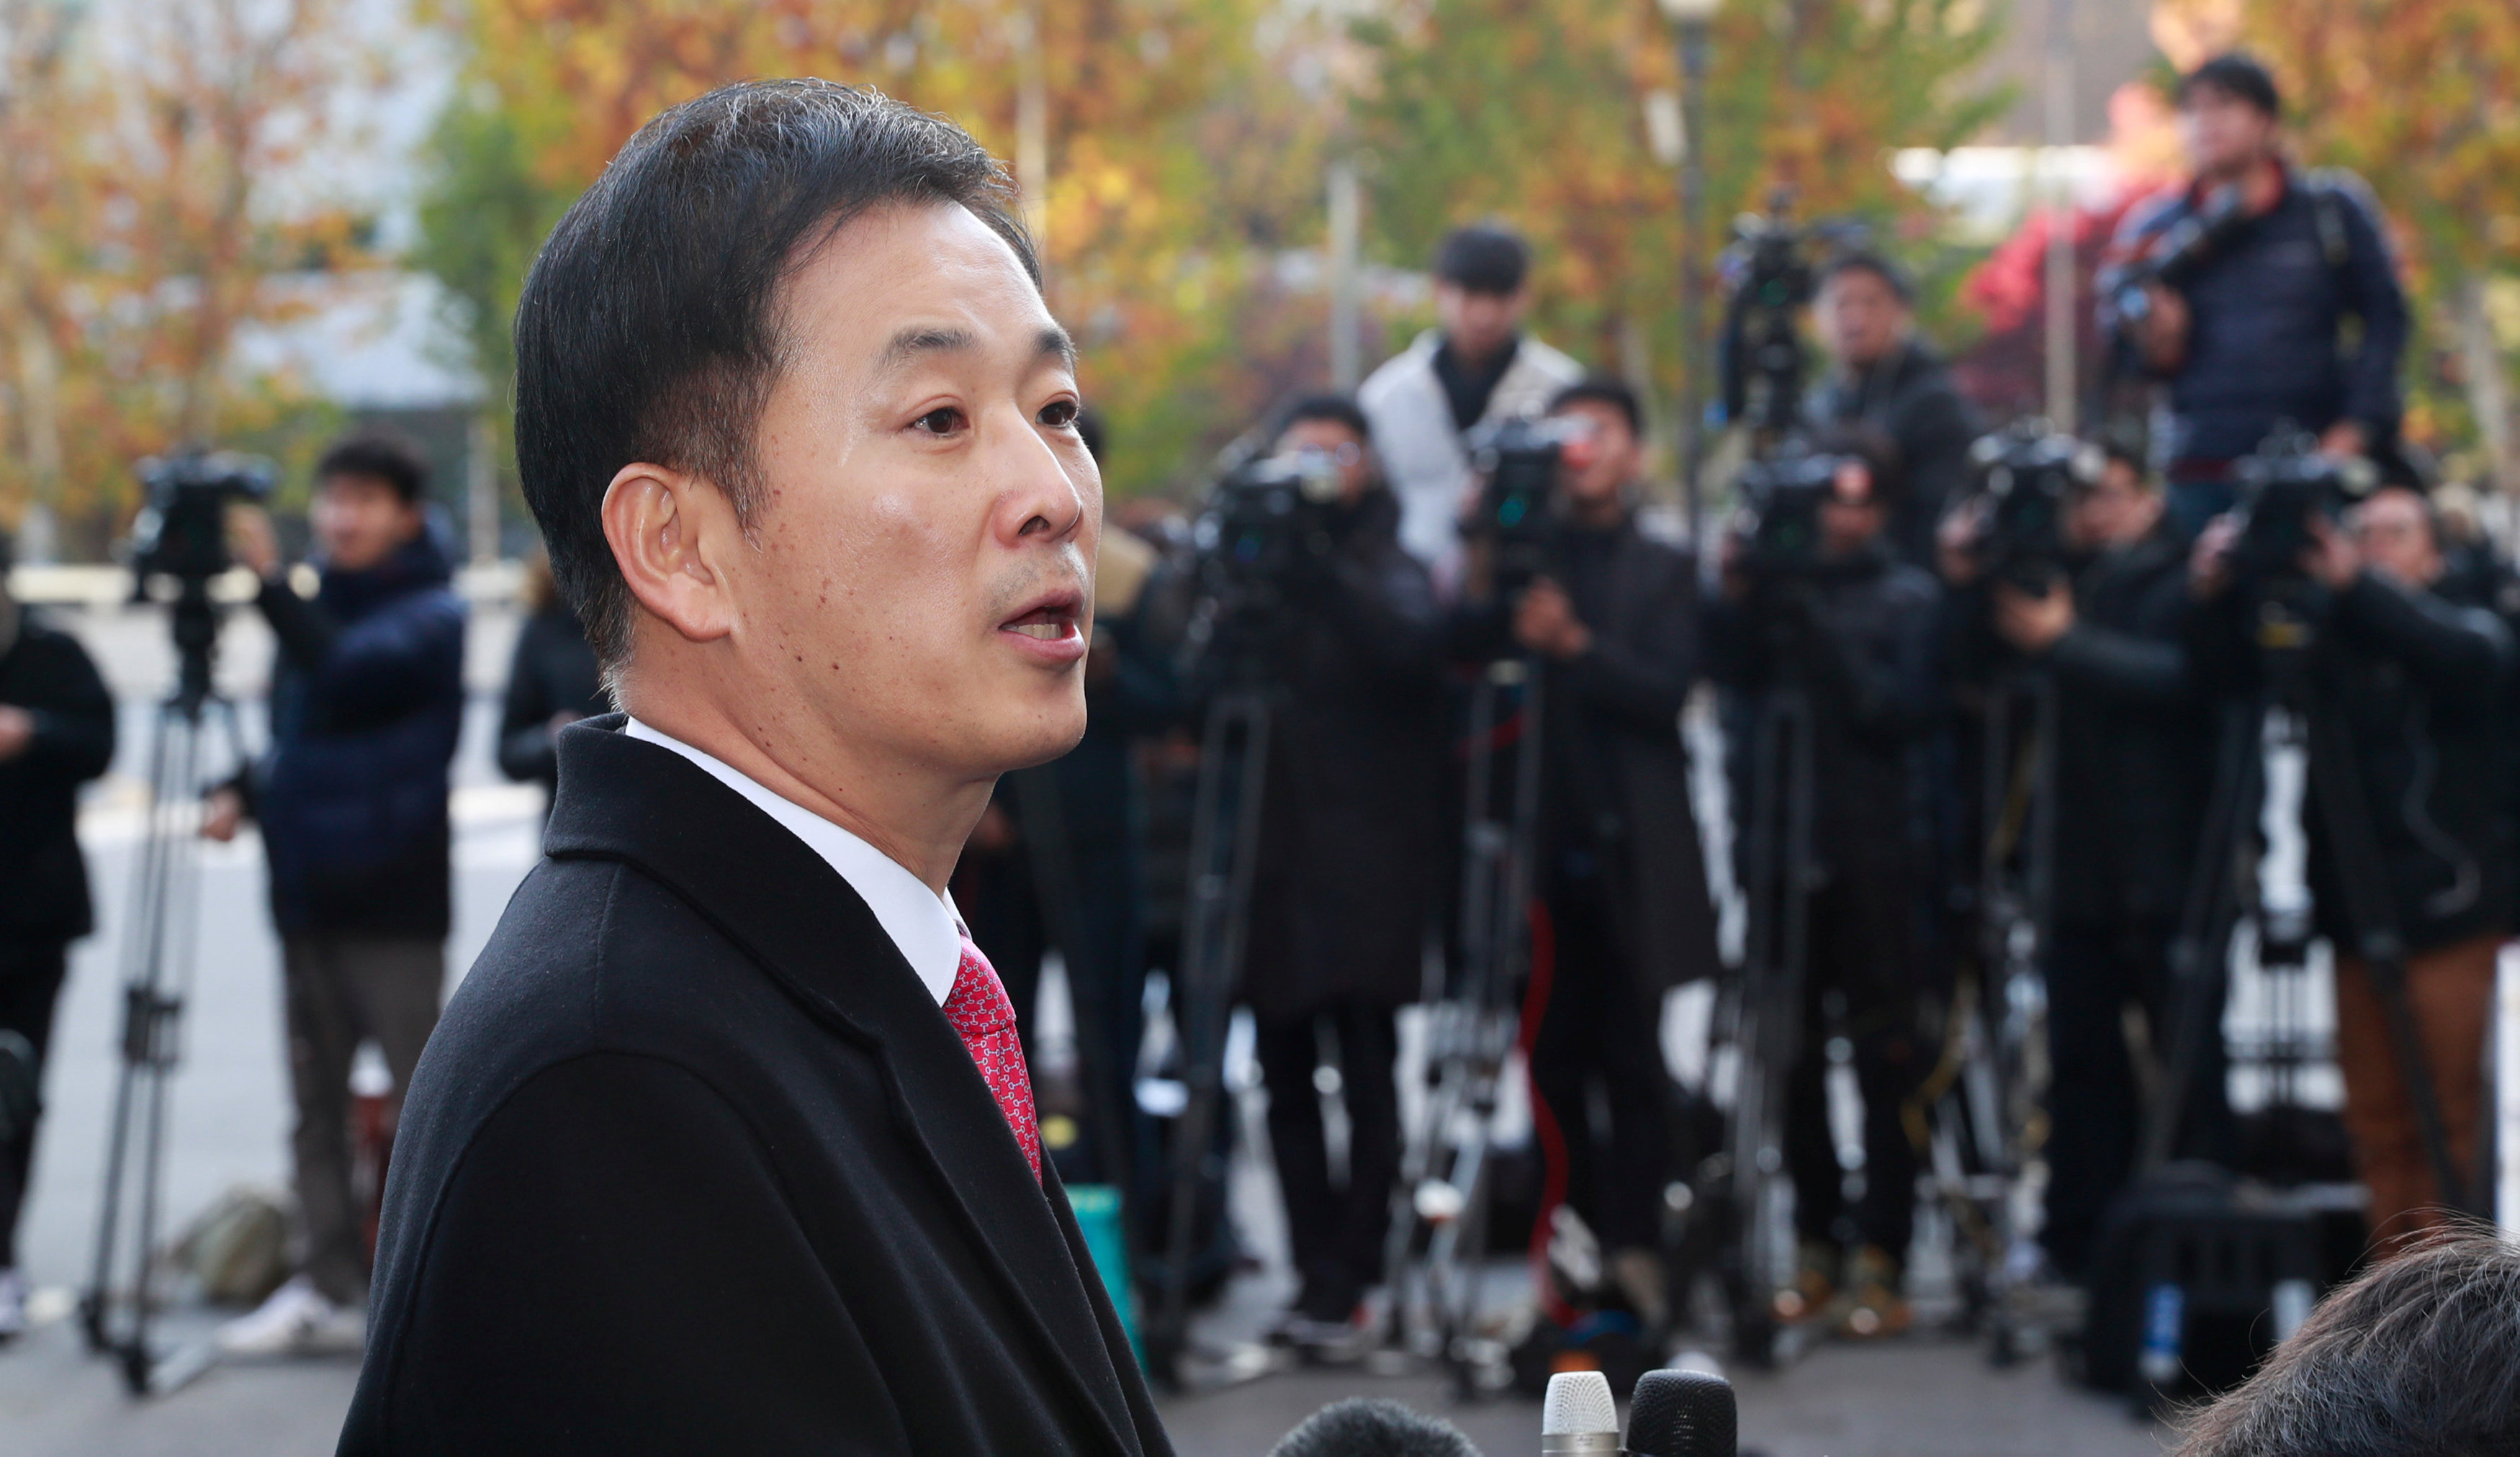 Yoo Yeong-ha, a lawyer for South Korean President Park Geun-hye, talks to reporters in Seoul, South Korea, November 15, 2016. Yonhap/via REUTERS ATTENTION EDITORS - THIS IMAGE HAS BEEN SUPPLIED BY A THIRD PARTY. SOUTH KOREA OUT. FOR EDITORIAL USE ONLY. NO